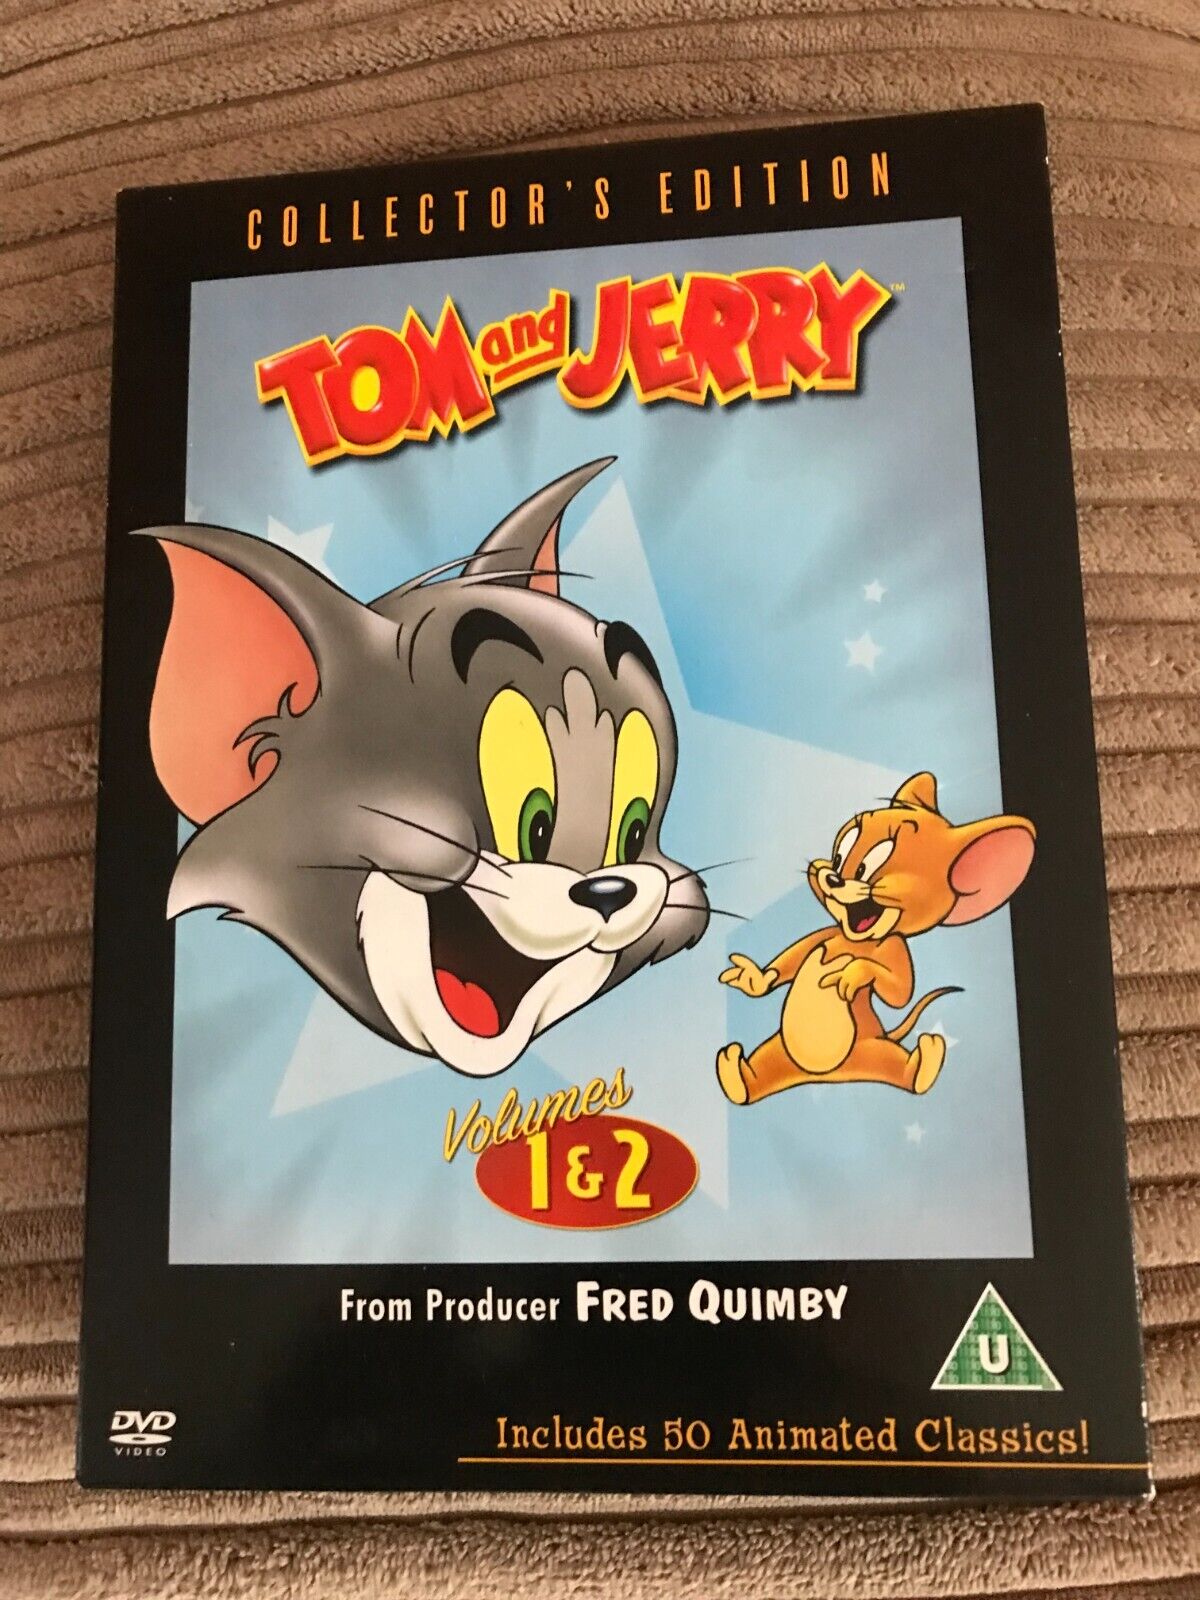 Tom And Jerry - Collectors Edition Vol 1-2 (DVD, 2007) for sale online |  eBay